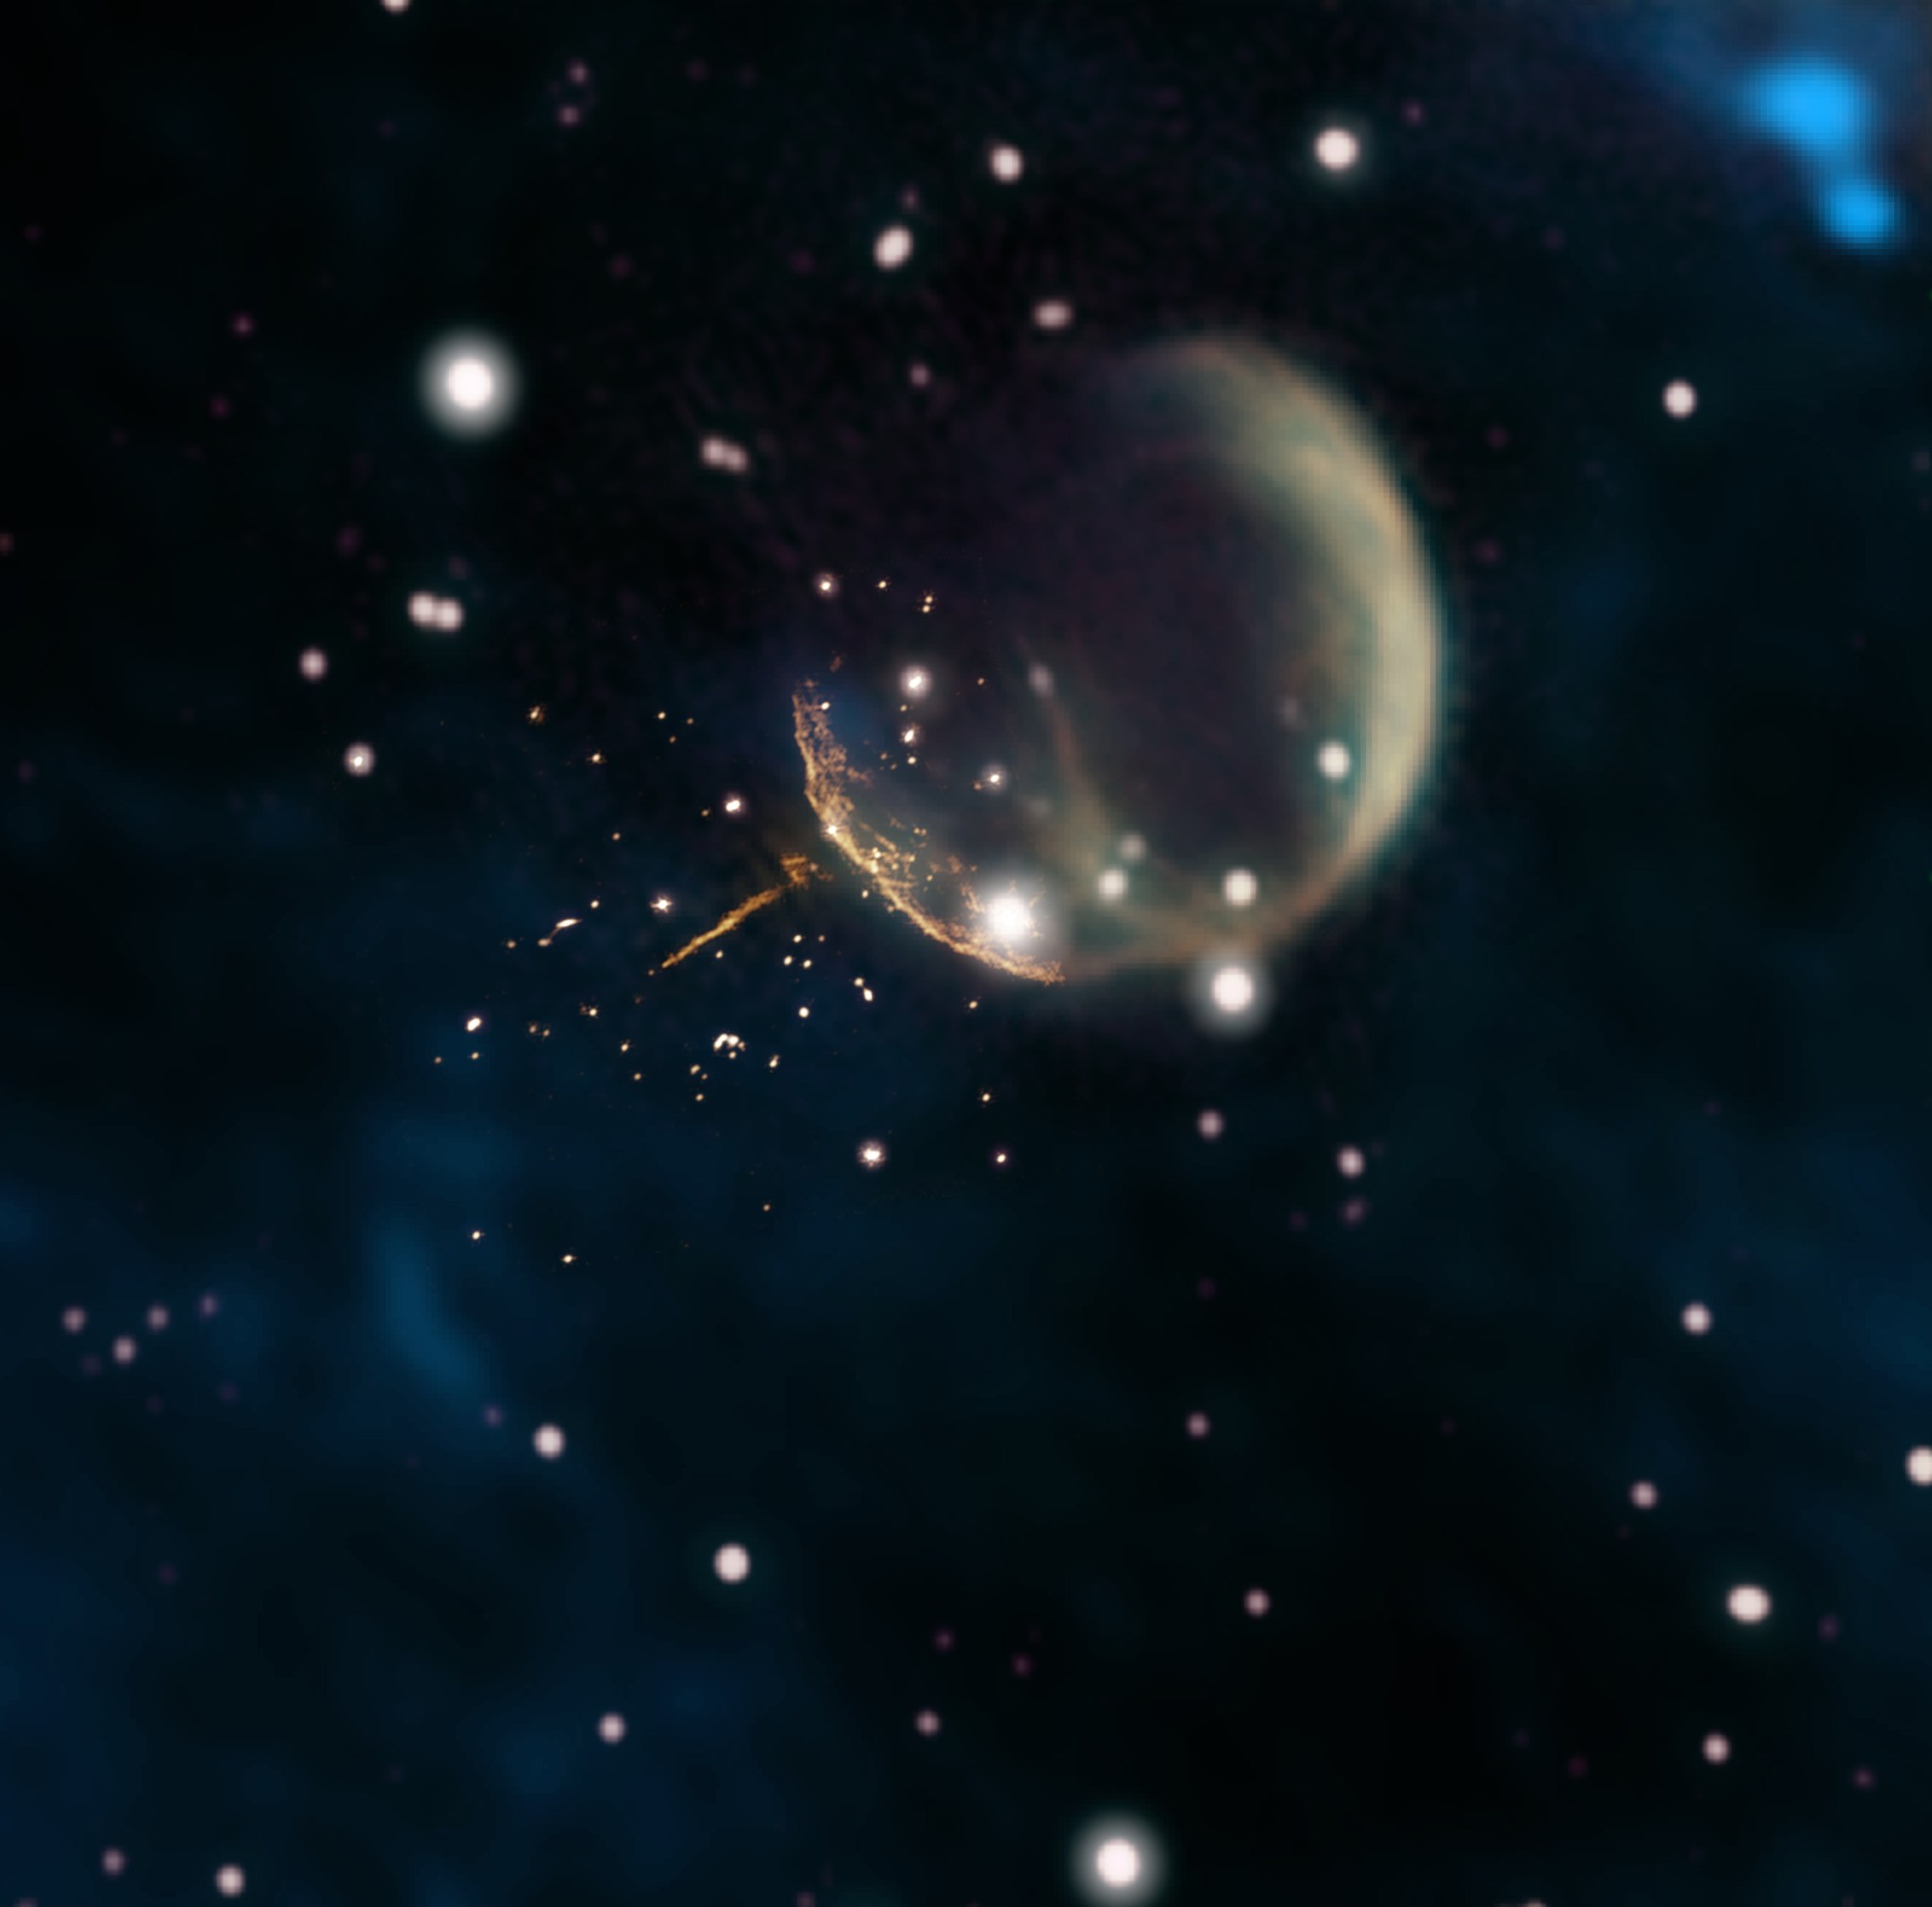 composite image showing CTB 1 supernova remnant and trail from pulsar J0002+6216